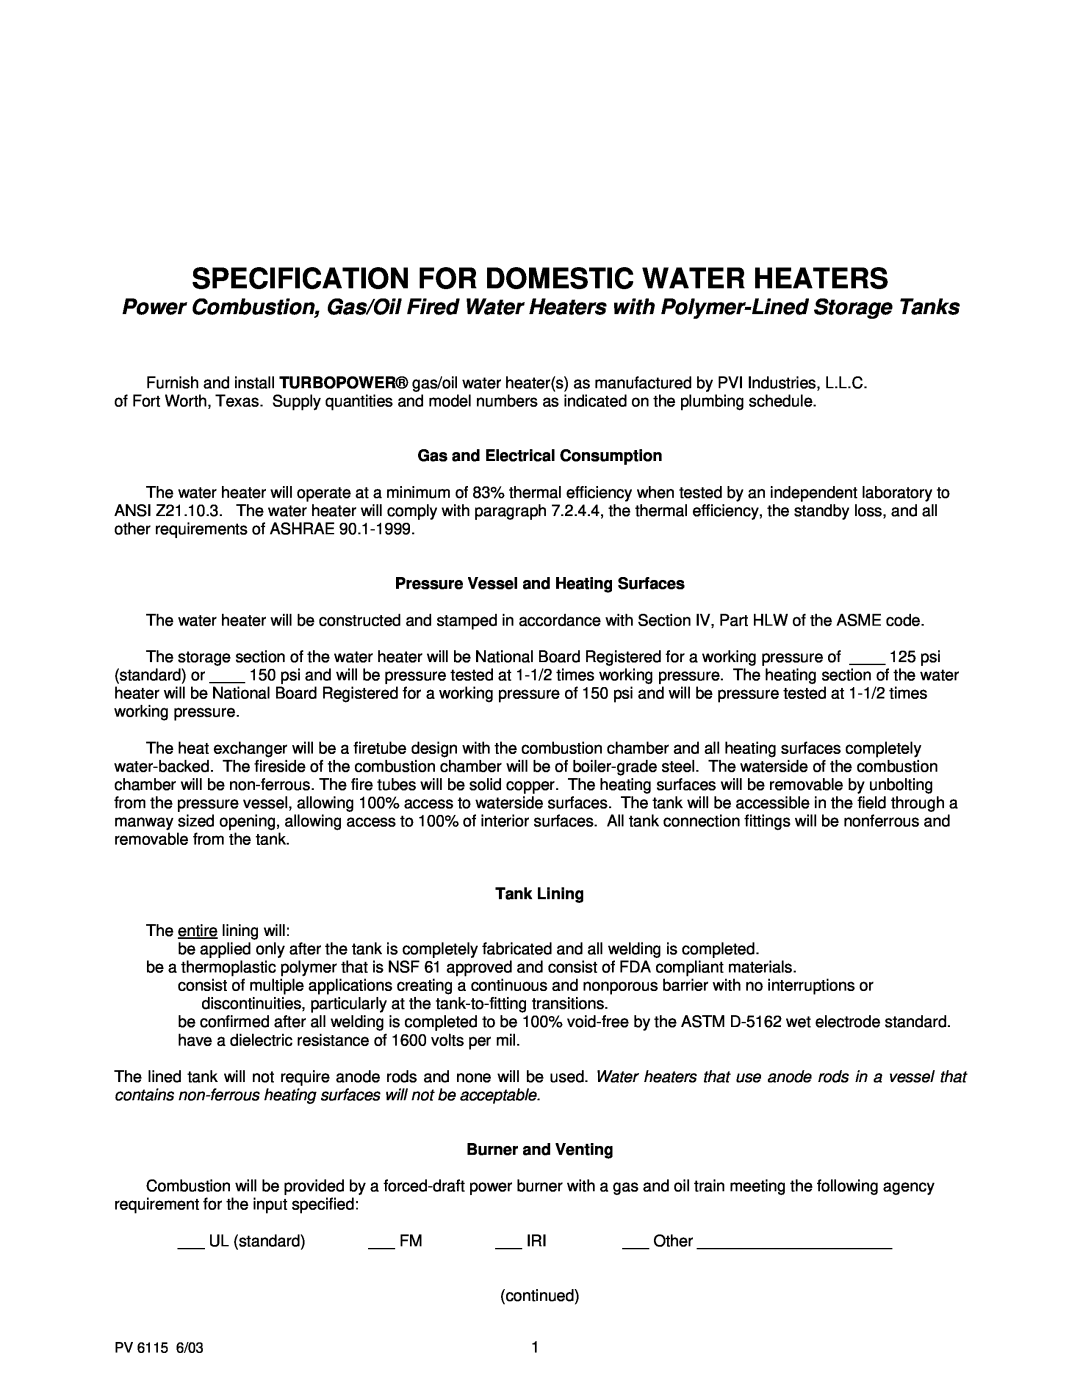 PVI Industries PV 6115 manual Specification For Domestic Water Heaters, Gas and Electrical Consumption, Tank Lining 